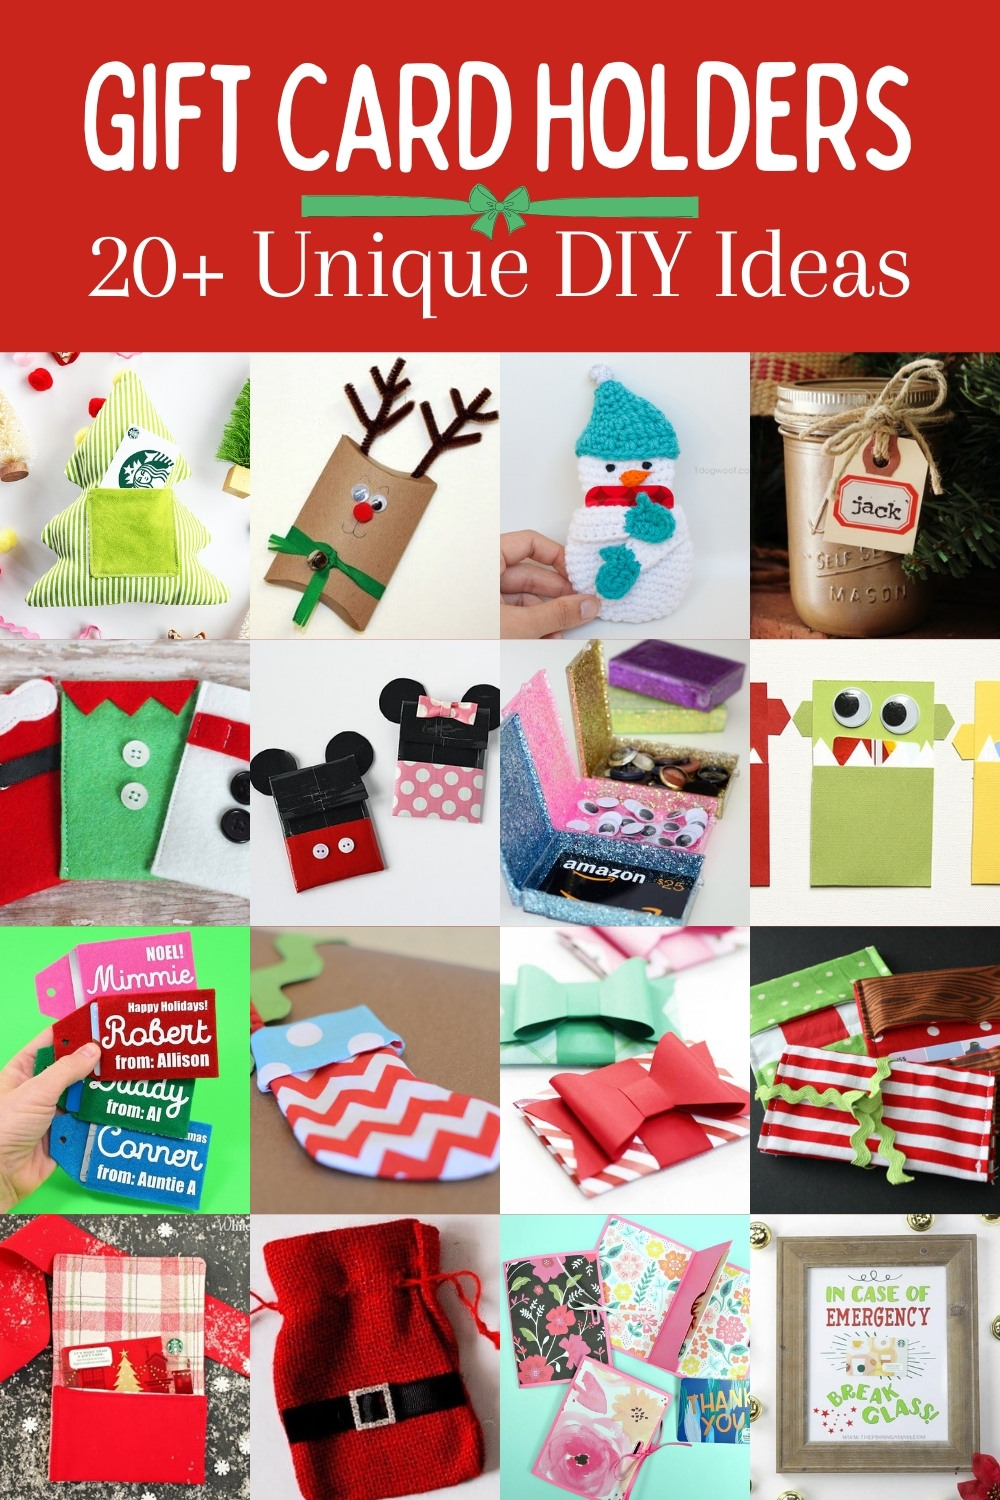 Over 20 DIY Gift Card Holders